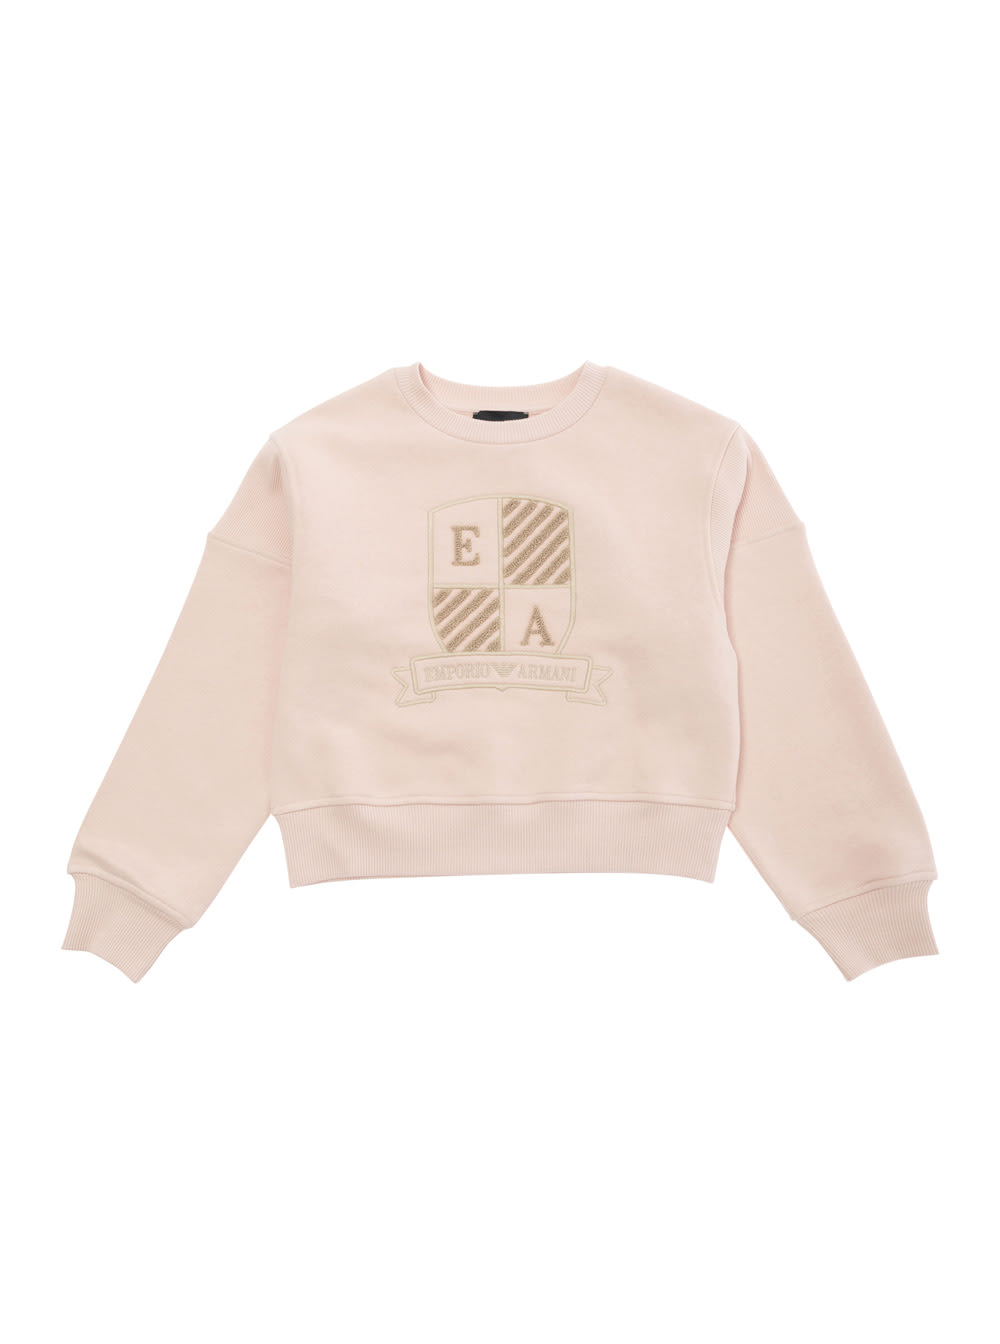 Emporio Armani Kids' Pink Sweatshirt With Jacquard Crest In Cotton Girl In Neutral